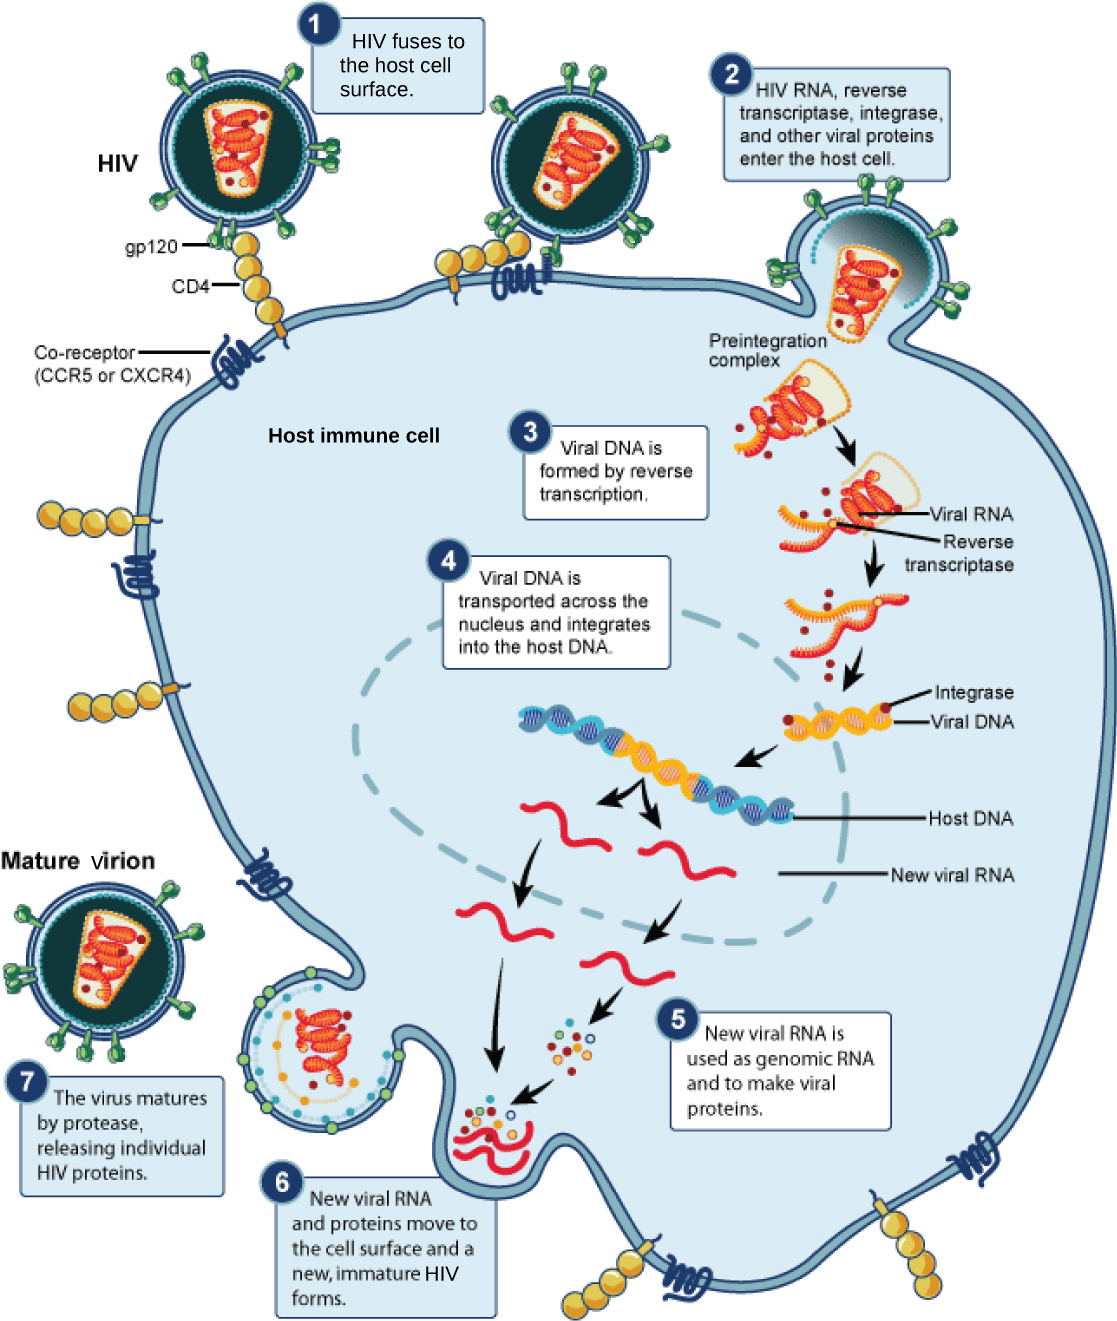 The illustration shows the steps in the HIV life cycle. In step 1, gp120 glycoproteins in the viral envelope attach to a CD4 receptor on the host cell membrane. The glycoproteins then attached to a co-receptor, CCR5 or CXCR4, and the viral envelope fuses with the cell membrane. HIV RNA, reverse transcriptase, and other viral proteins are released into the host cell. Viral DNA is formed from RNA by reverse transcriptase. Viral DNA is then transported across the nuclear membrane, where it integrates into the host DNA. New viral RNA is made; it is used as genomic RNA and to make viral proteins. New viral RNA and proteins move to the cell surface and a new, immature HIV forms. The virus matures when a protease releases individual HIV proteins.